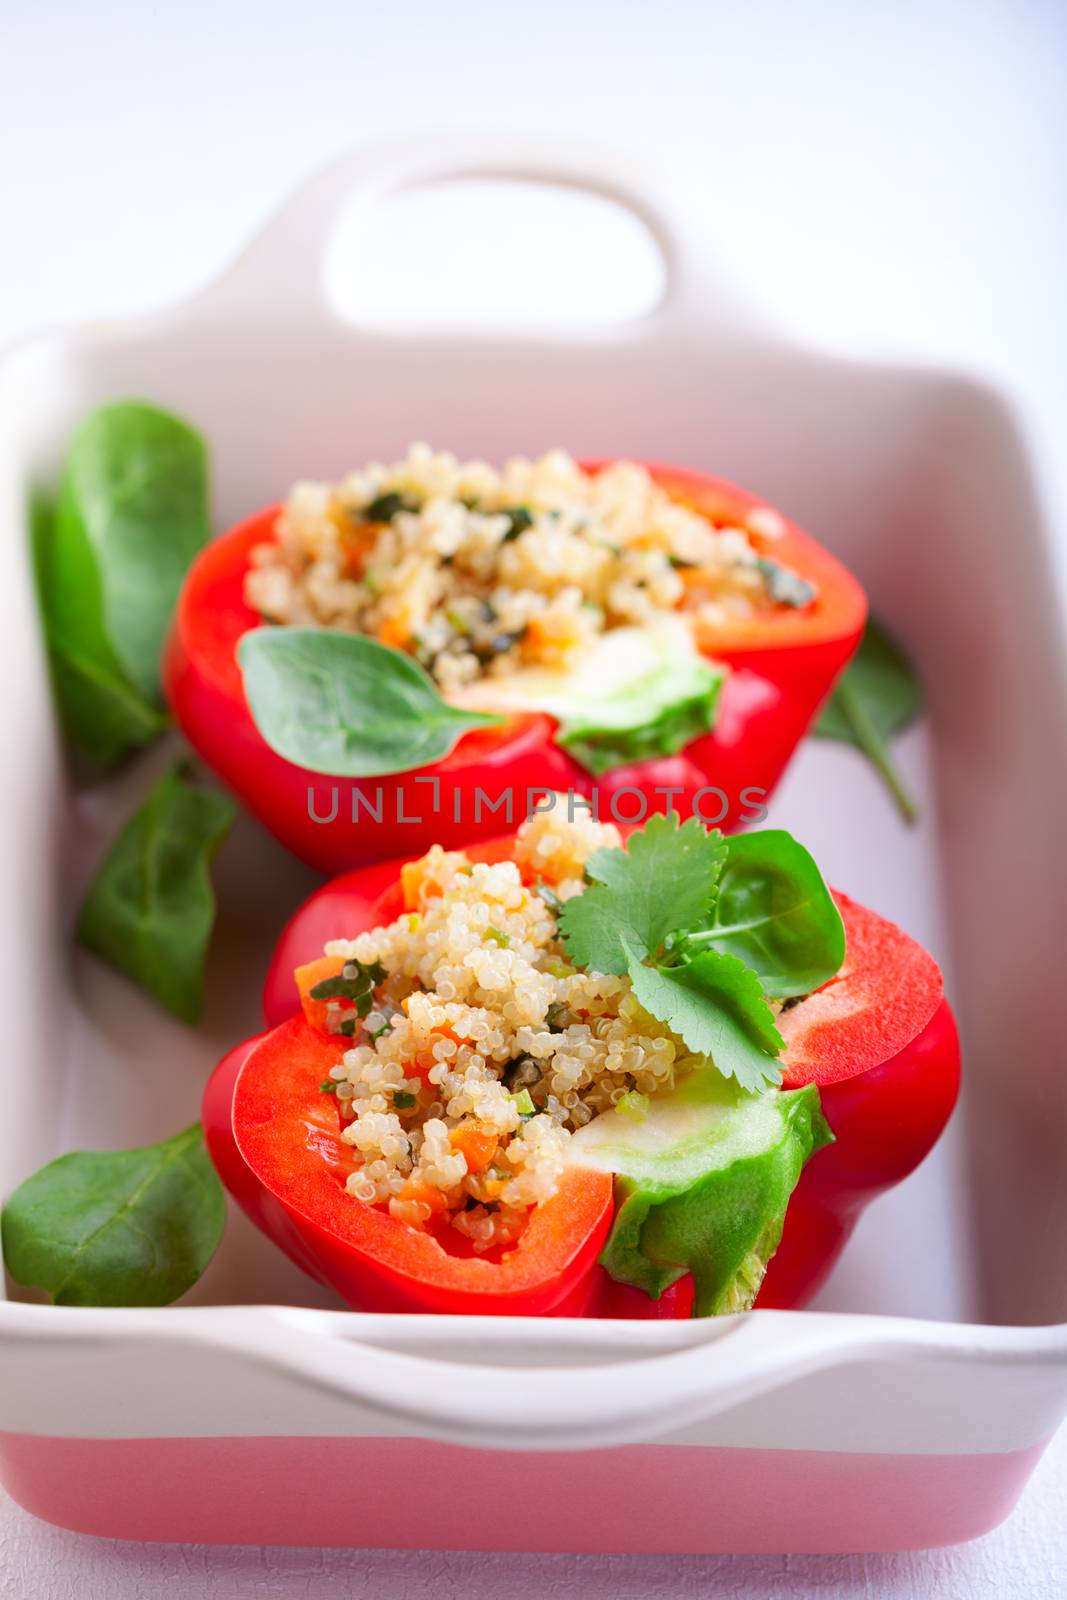 Stuffed red Peppers by supercat67